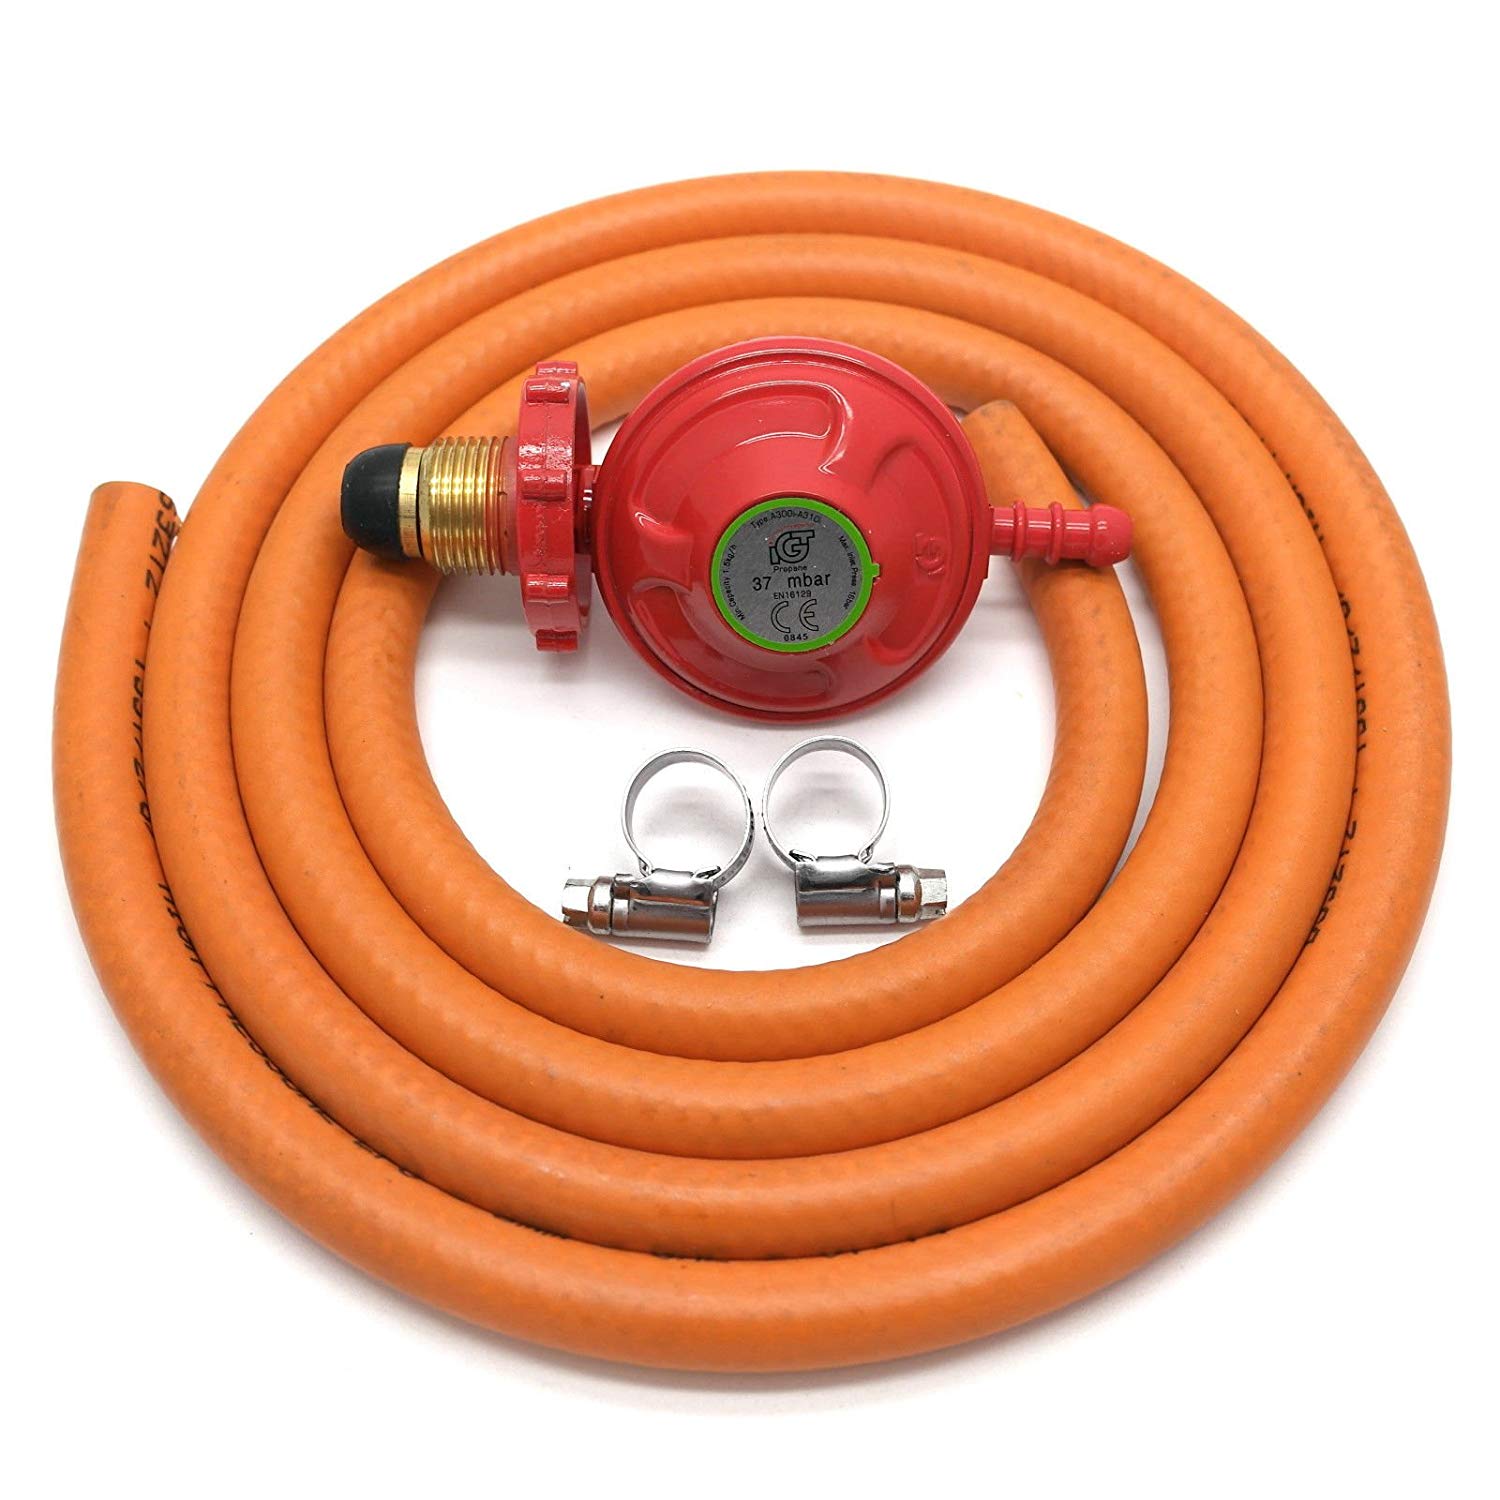 HAND WHEEL Propane Gas Regulator 37mbar 1 Metre 8mm ID Hose Pipe And 2 Clips CO 